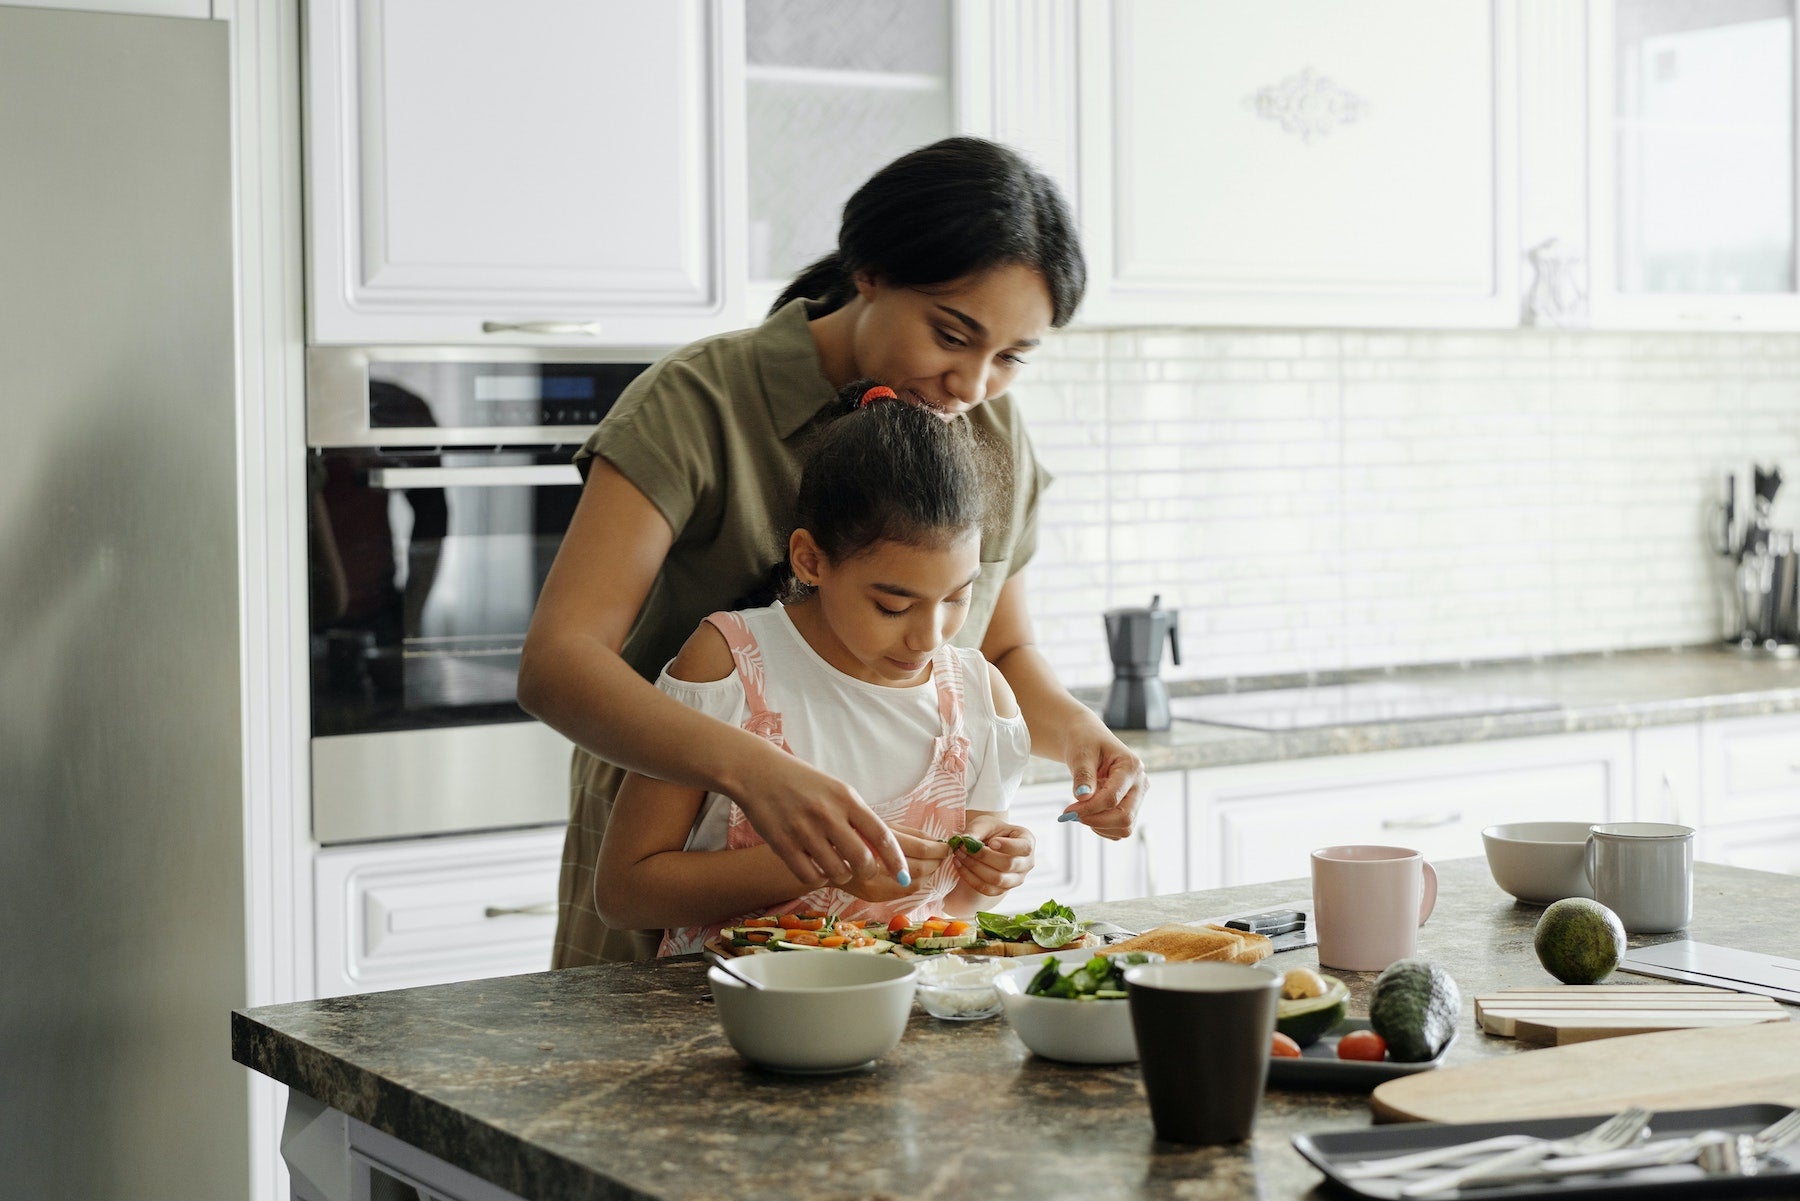 Cooking meals with your kids